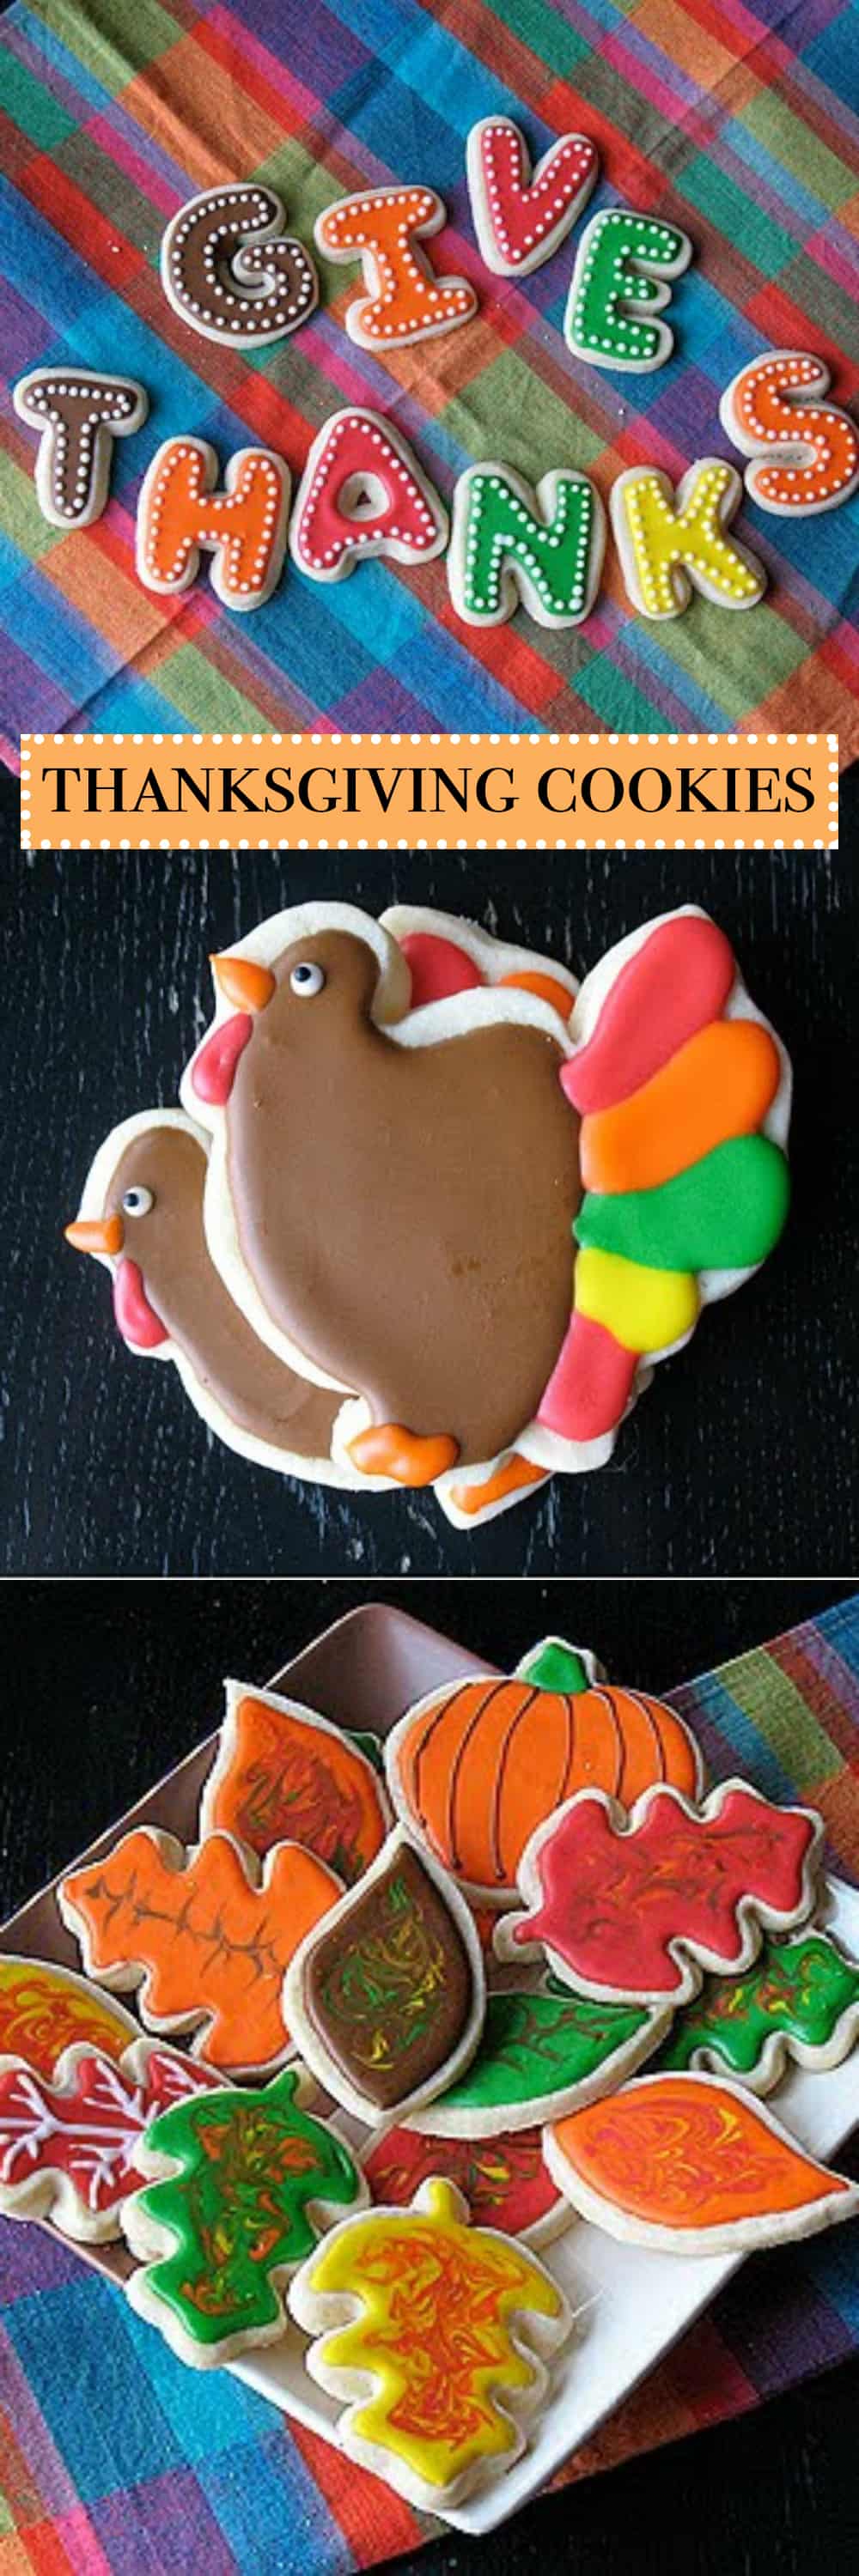 A close up photo of Thanksgiving cookies.